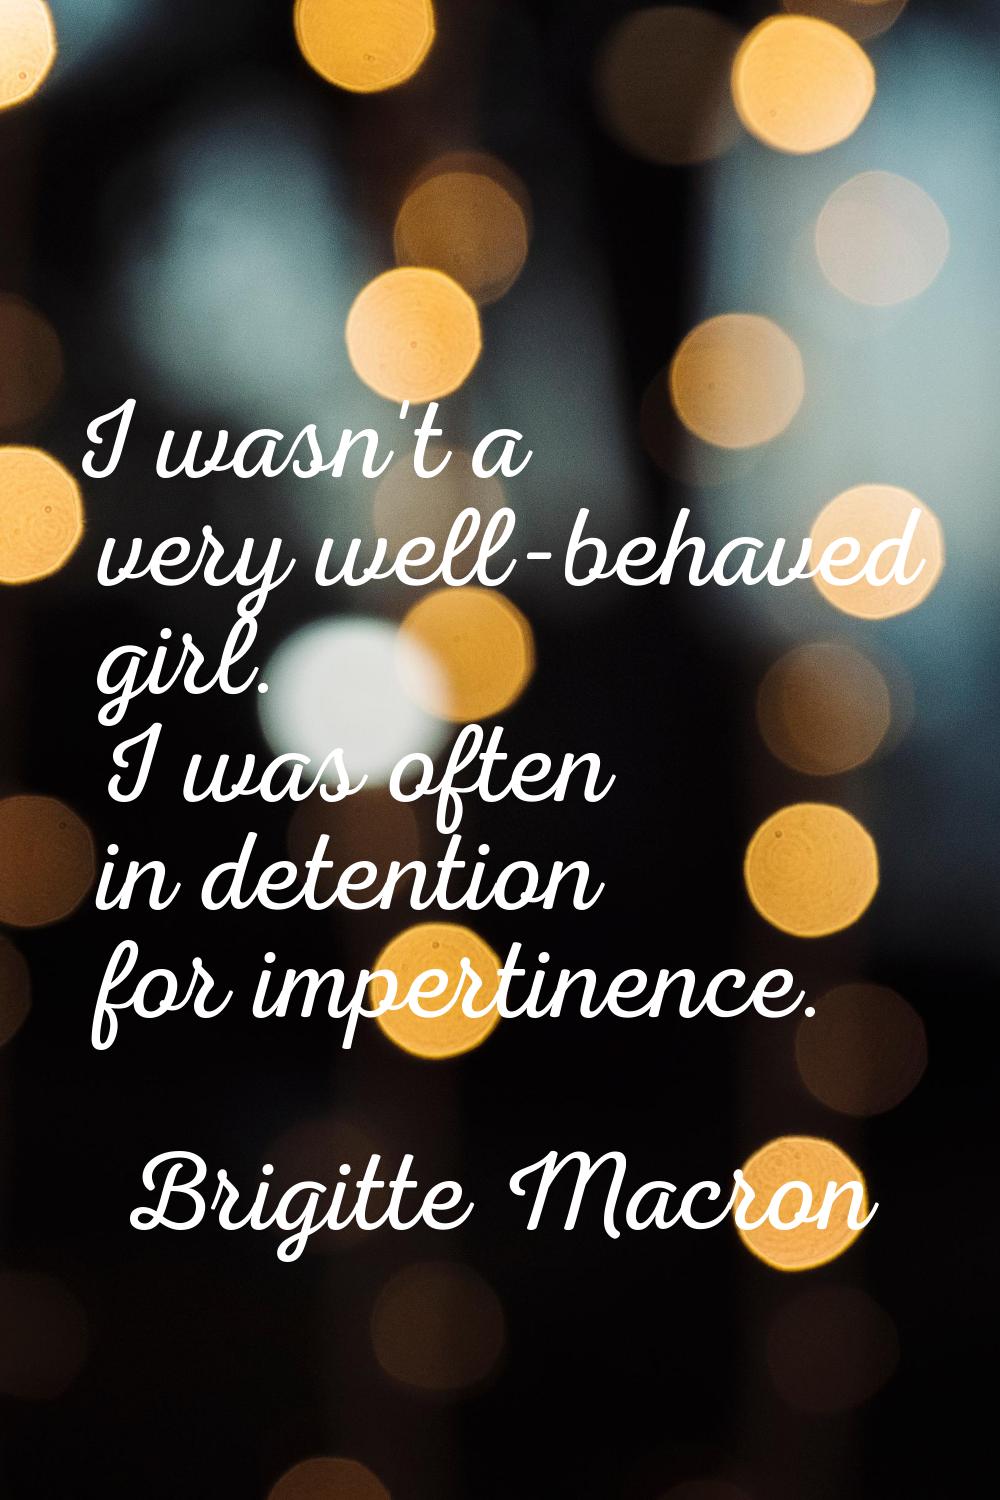 I wasn't a very well-behaved girl. I was often in detention for impertinence.